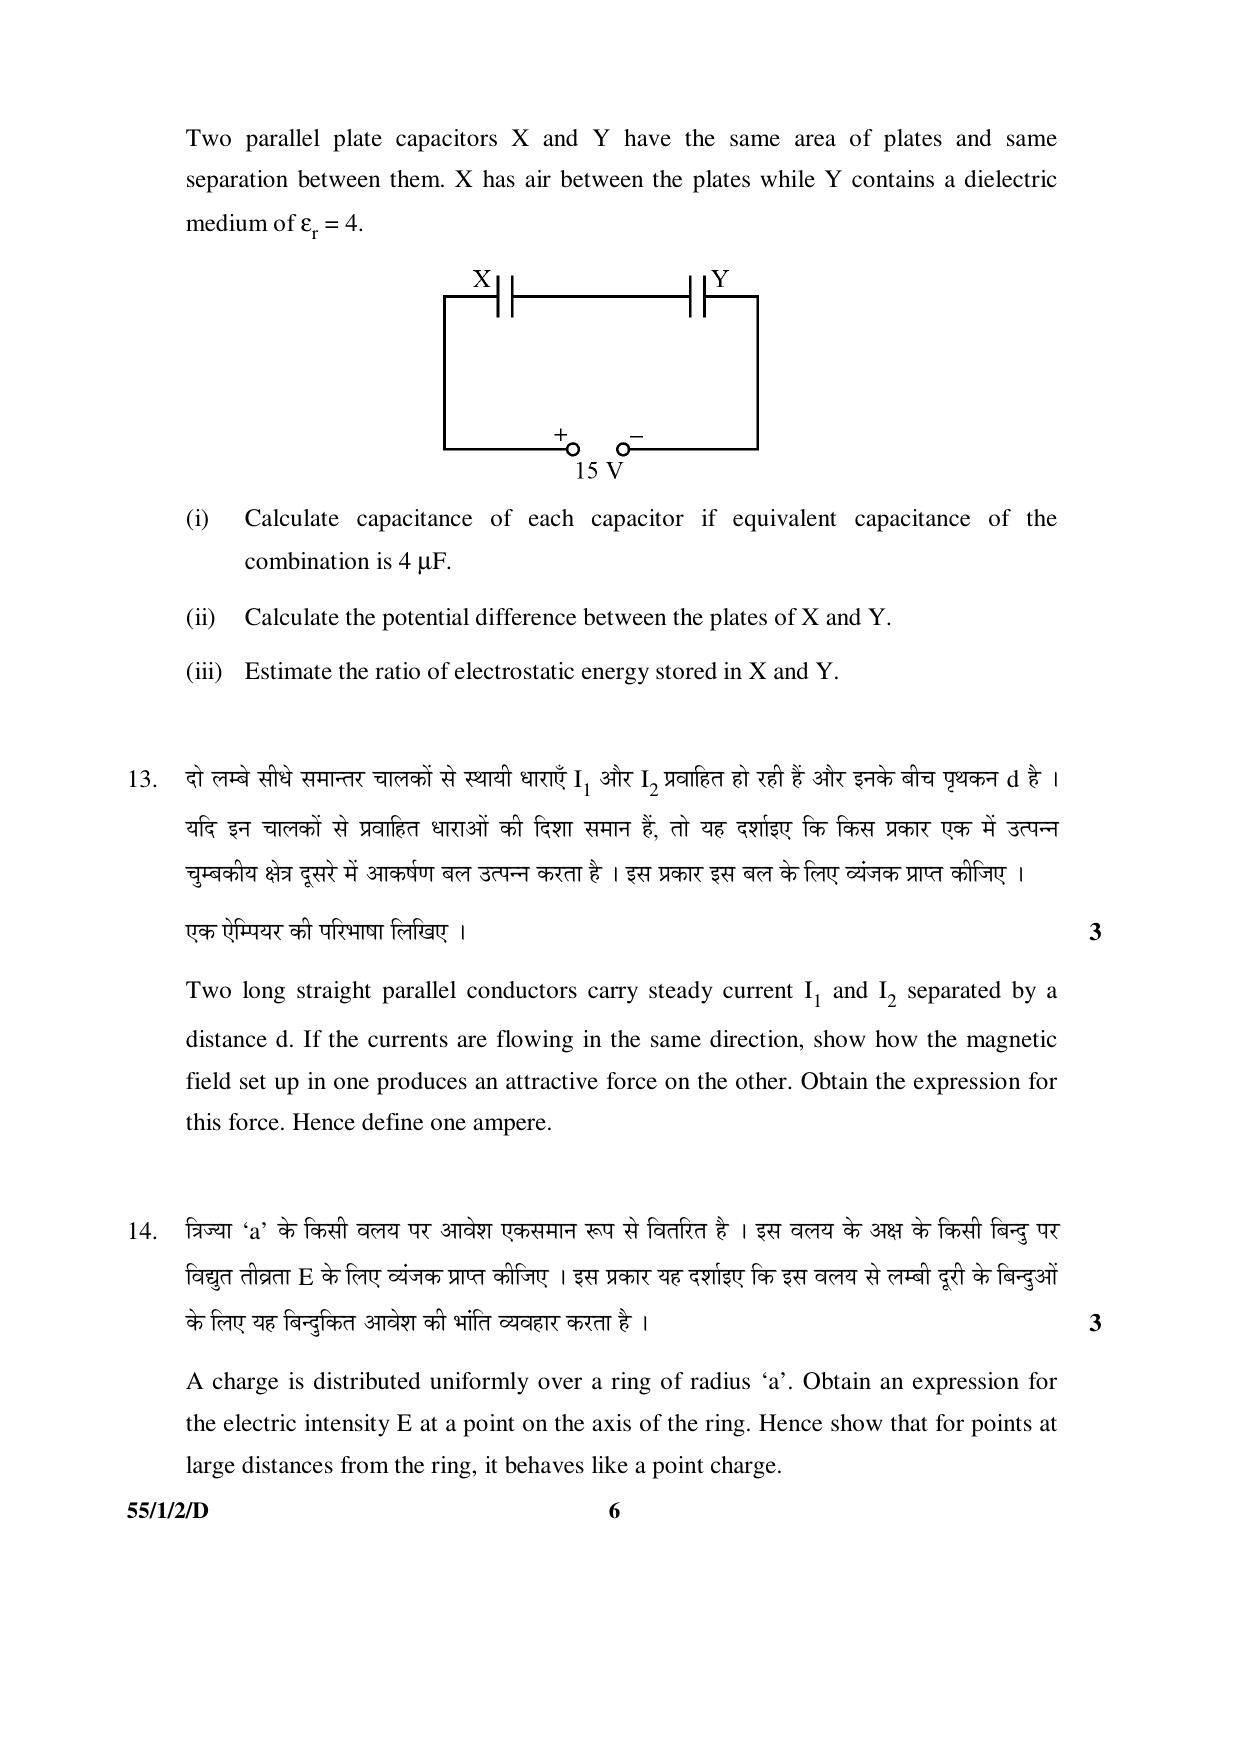 CBSE Class 12 55-1-2-D PHYSICS 2016 Question Paper - Page 6